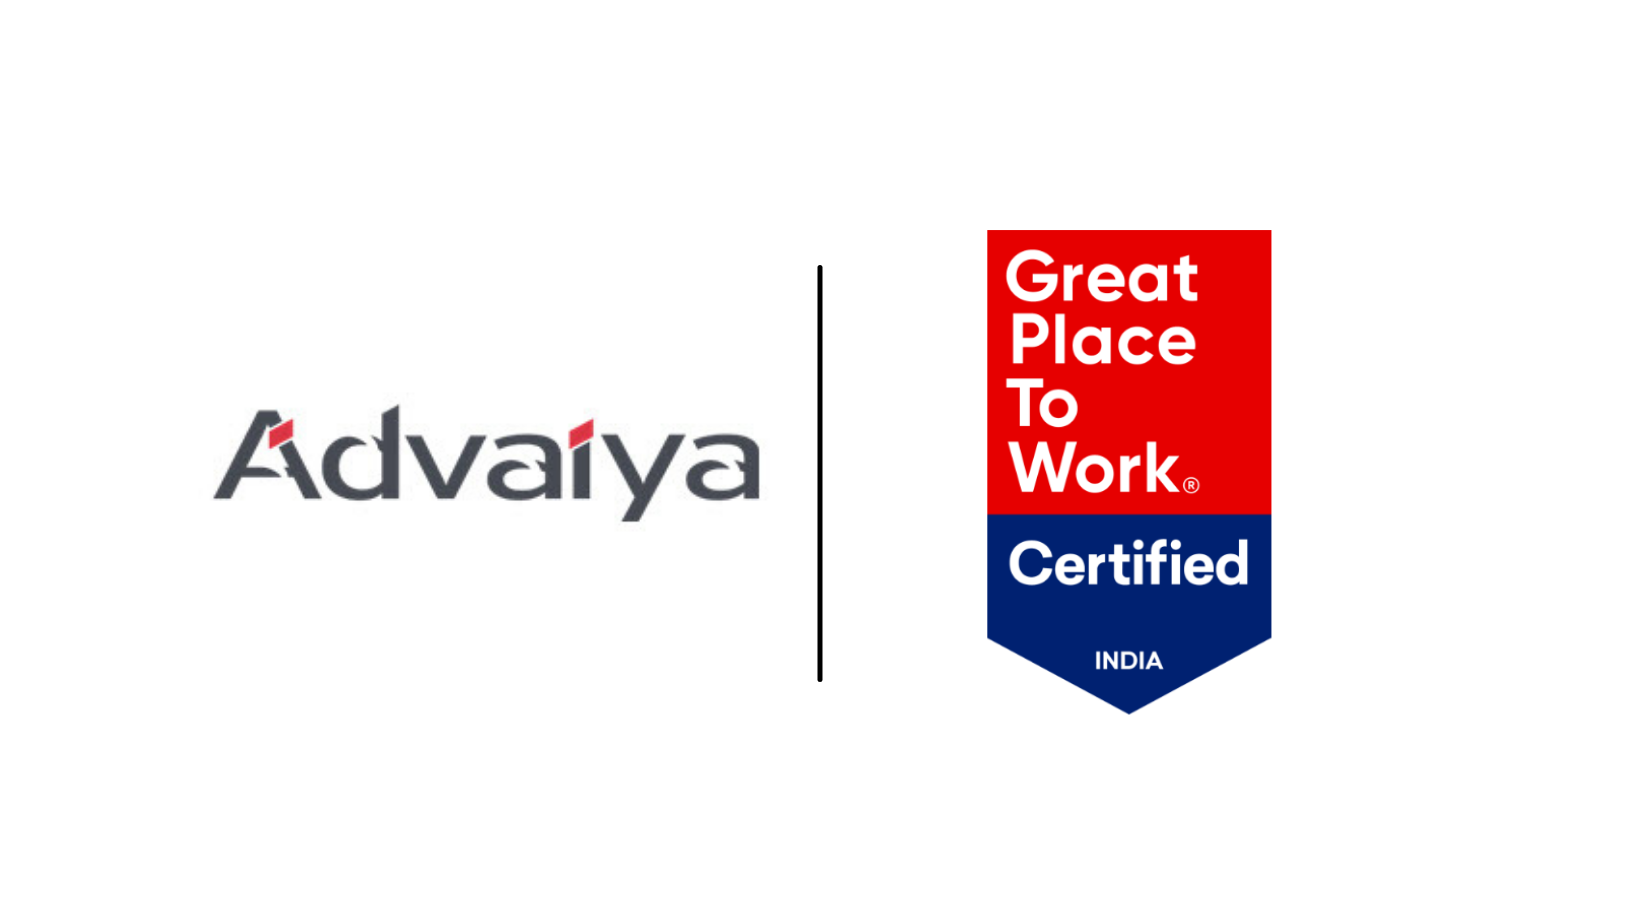 Netguru is Officially “Great Place To Work®” Certified!